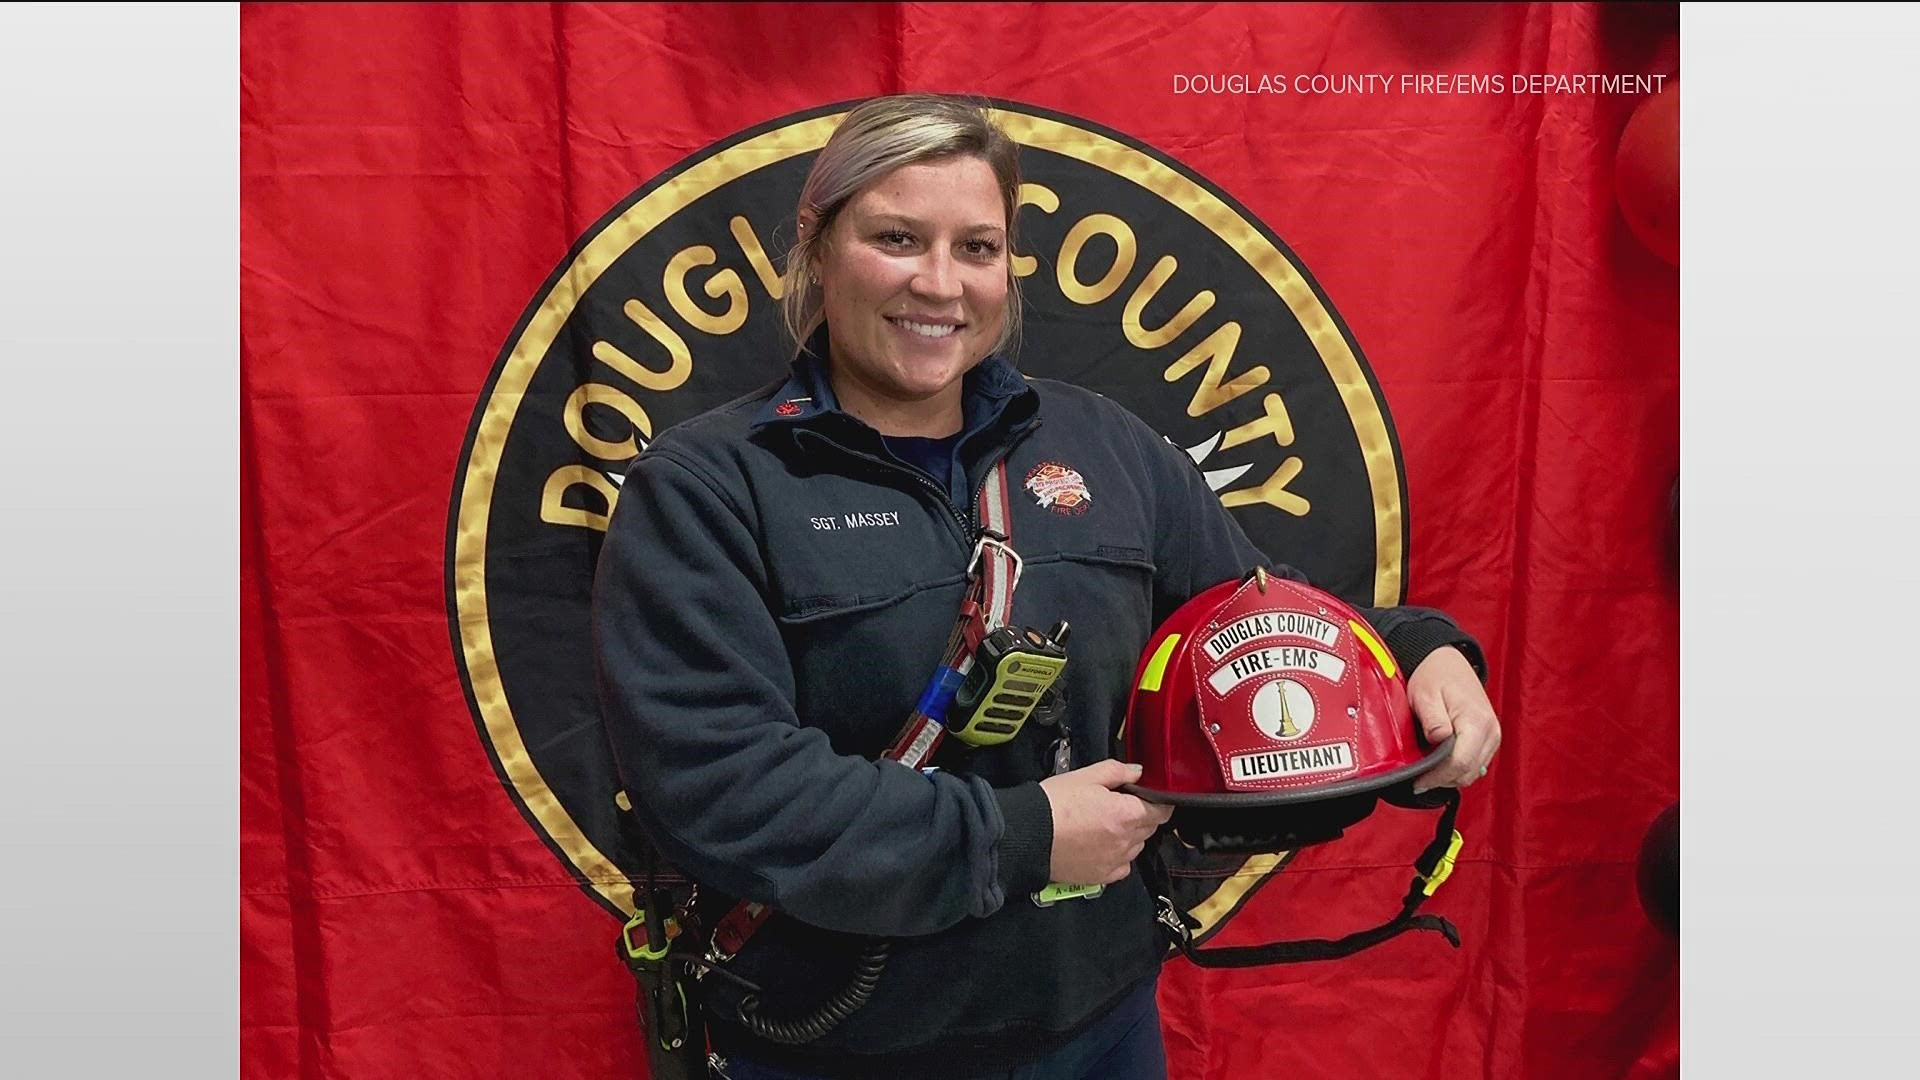 Kaitlyn Massey first joined the fire department in 2016, but seven years and a promotion later, she's the first woman to hold the position.